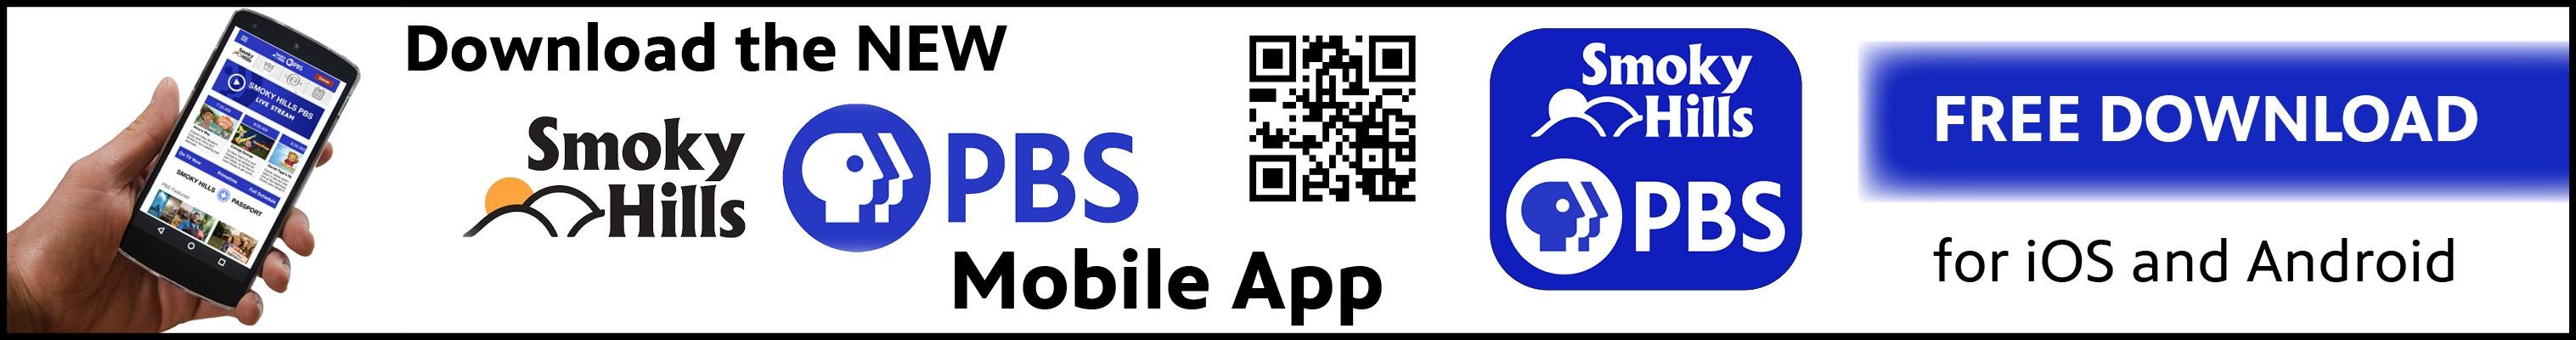 Download the NEW Smoky Hills PBS app